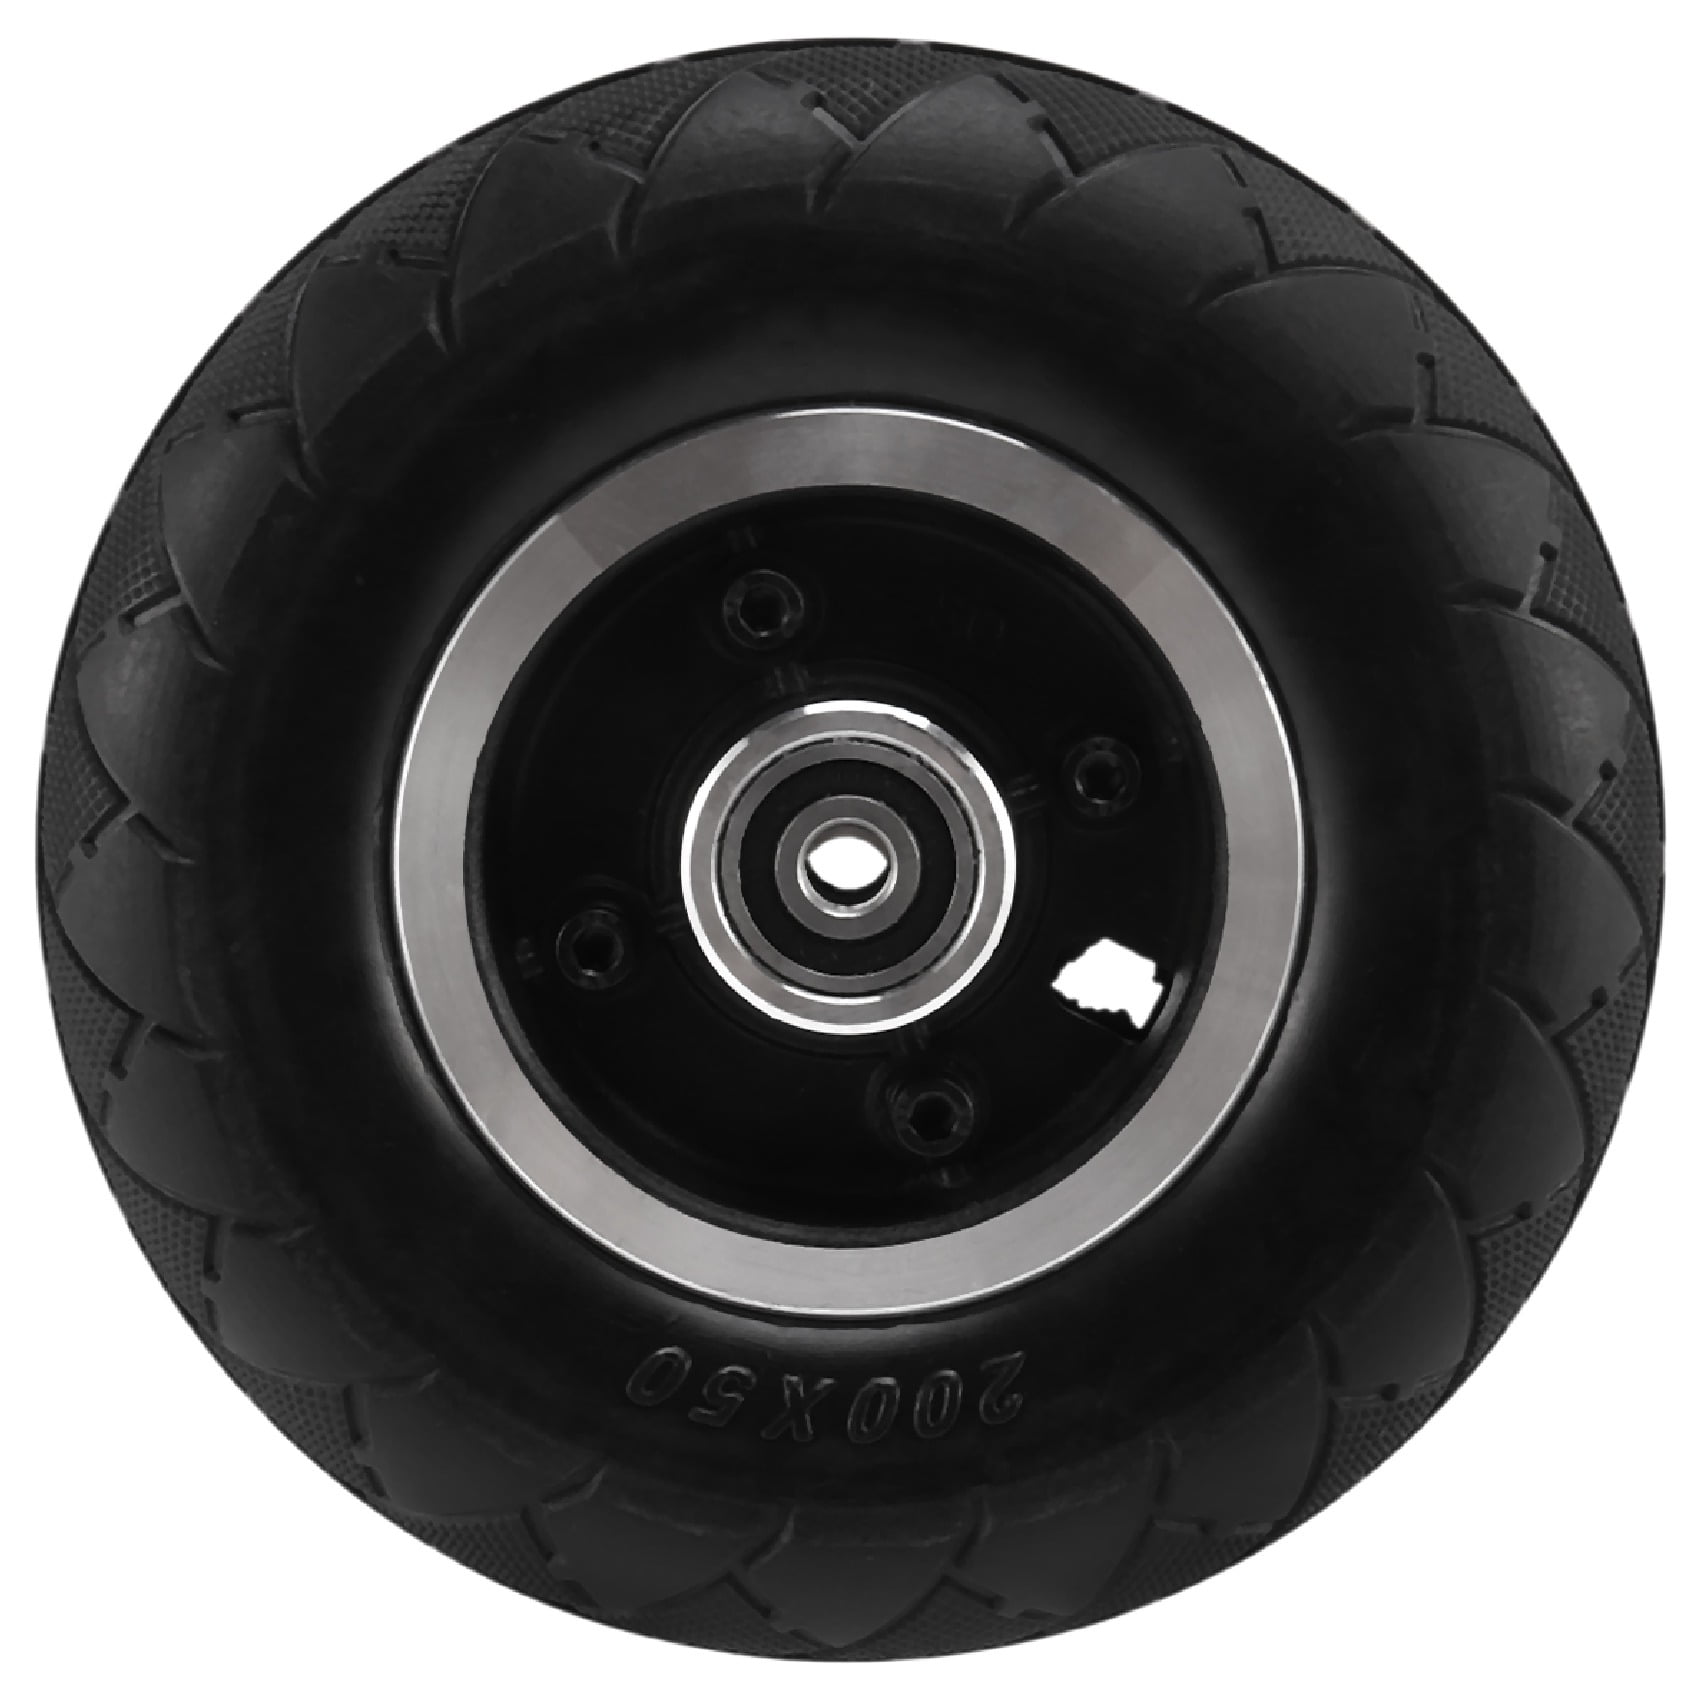  RidTianTek Electric Scooter Tubeless Tires,Thickened